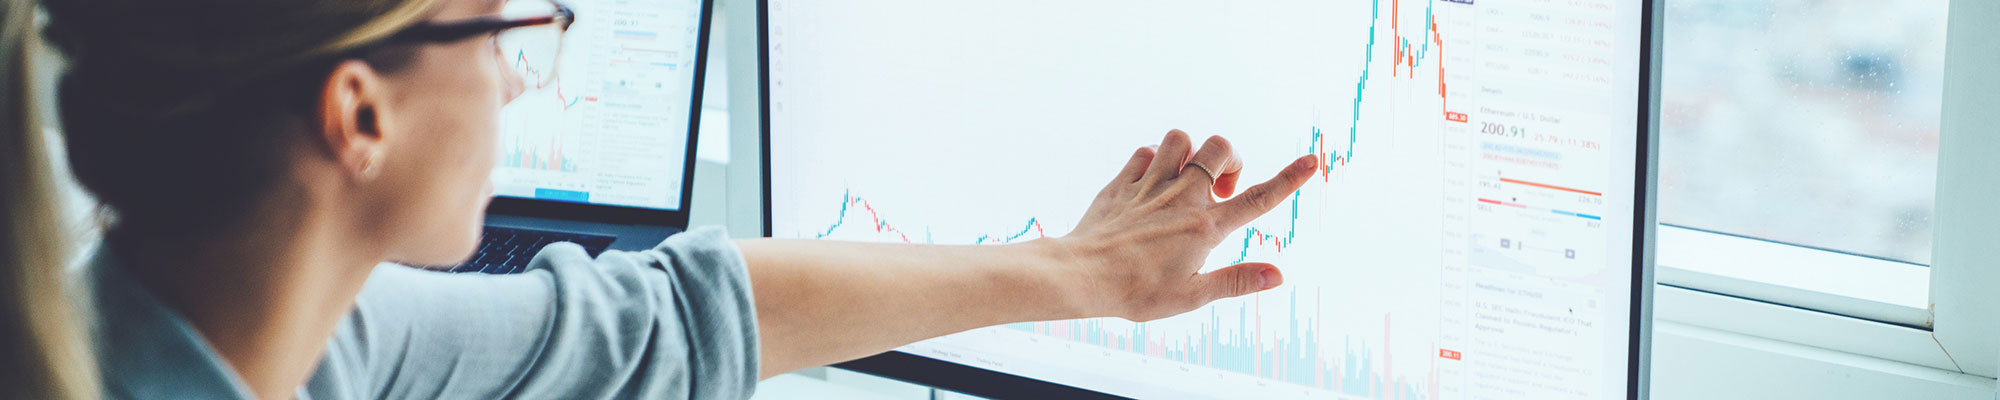 woman pointing a peak on a financial chart